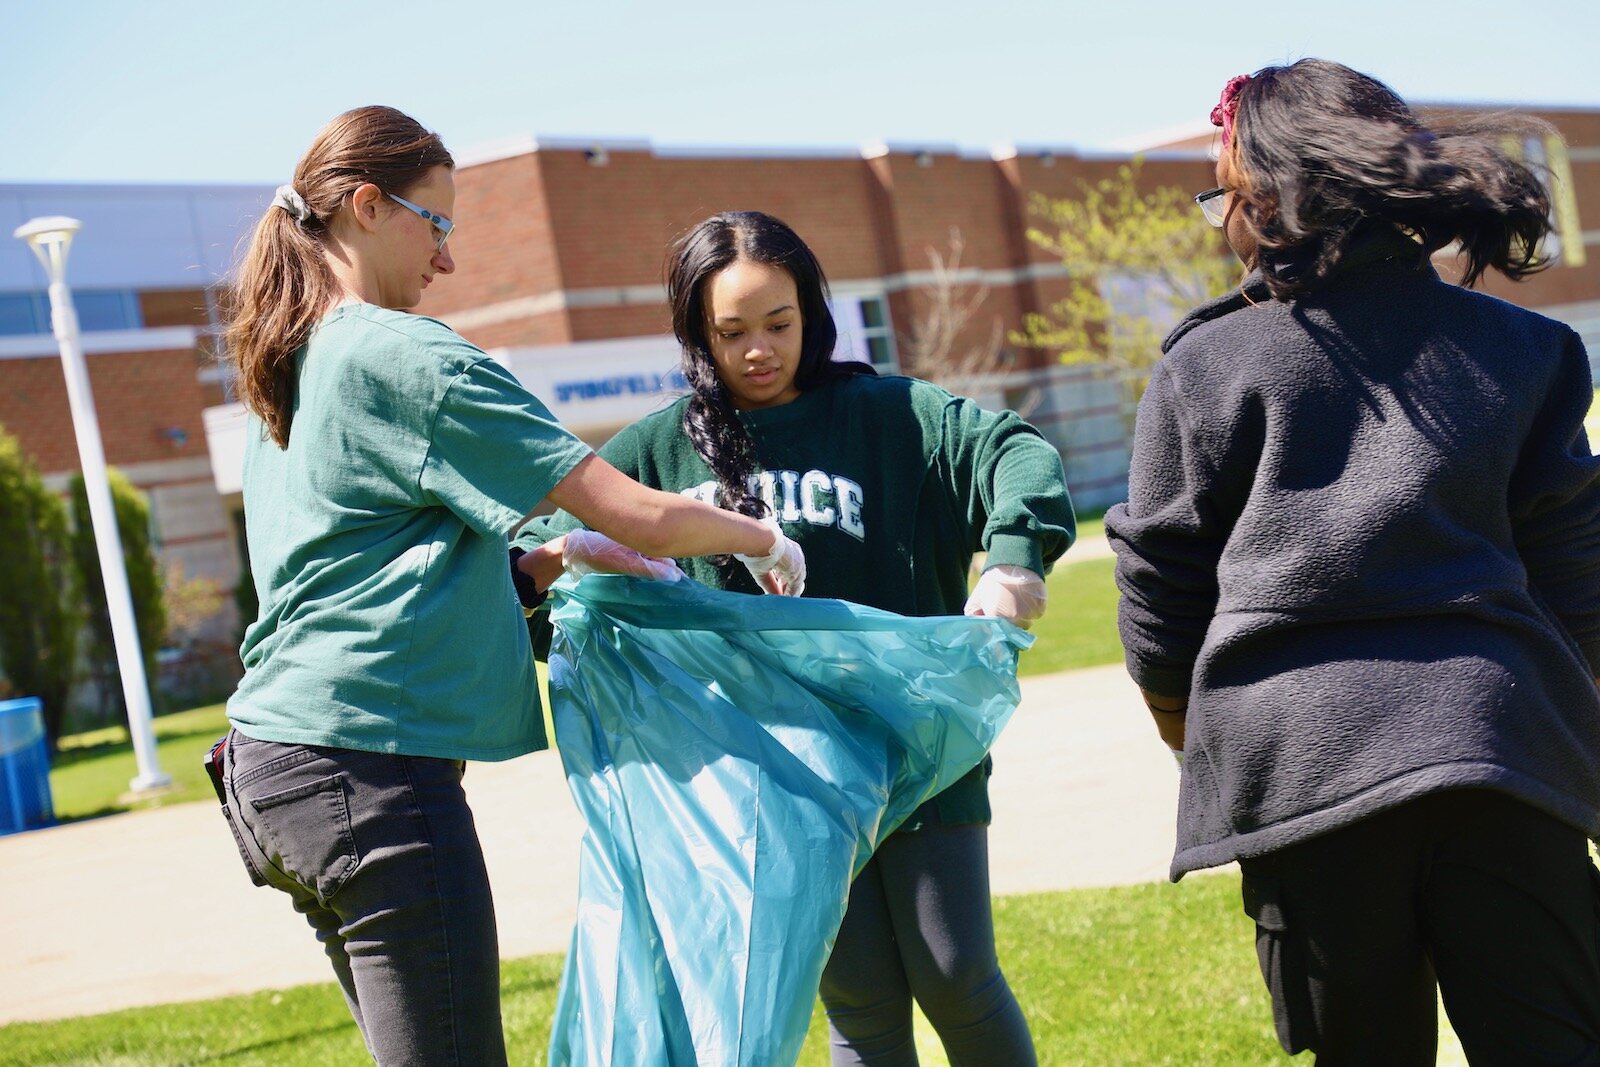 Springfield High School National Honor Society members participated in a beautification effort as their Earth Day observance.